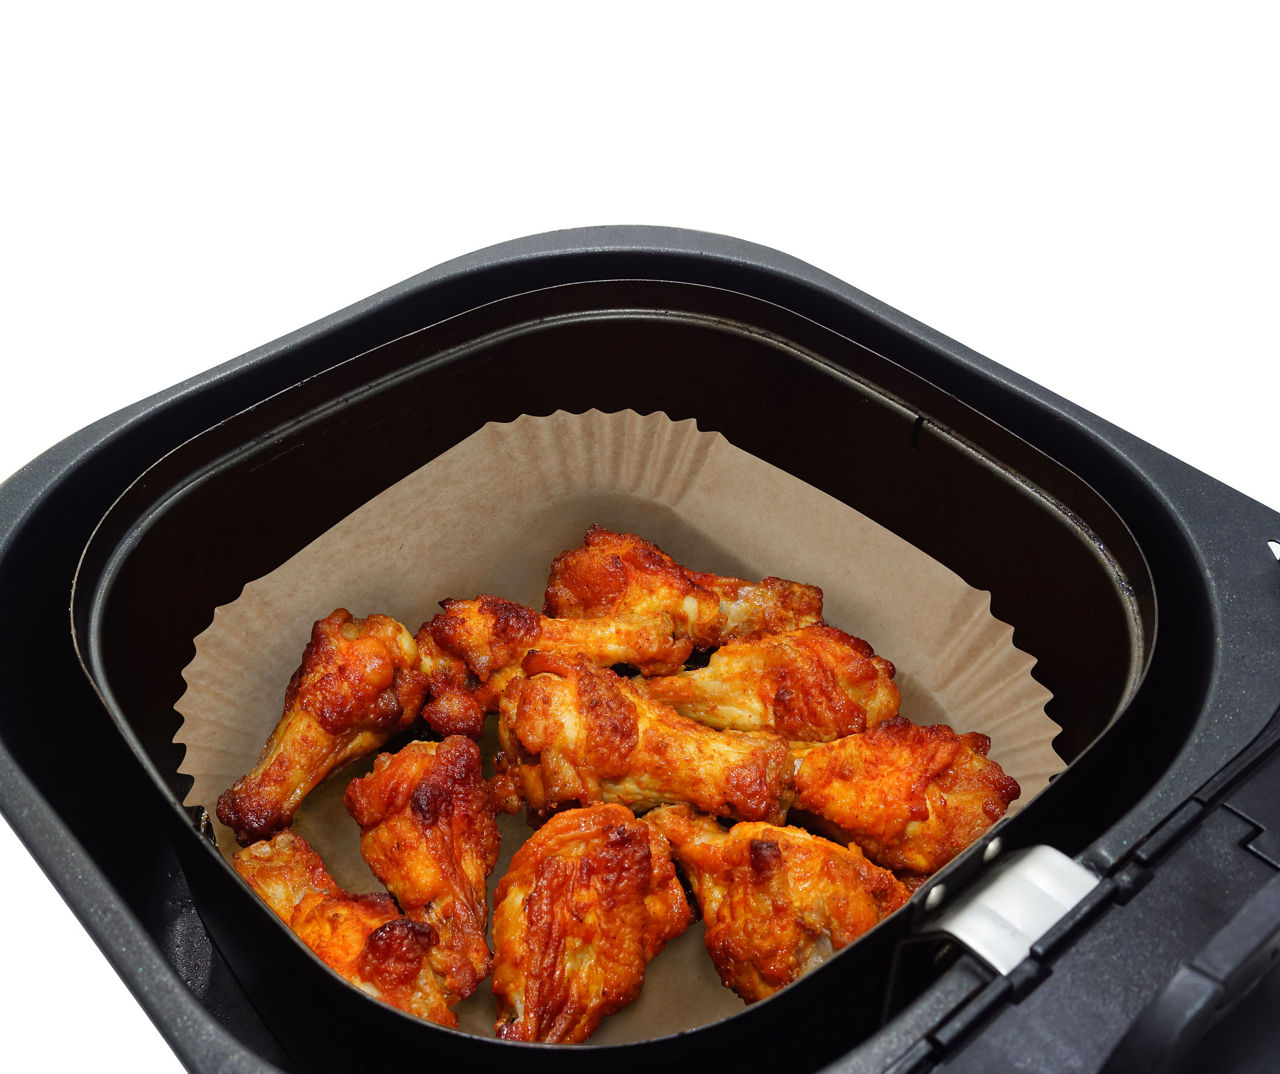 Handy Gourmet Square Disposable Air Fryer Liners, 30-Pack